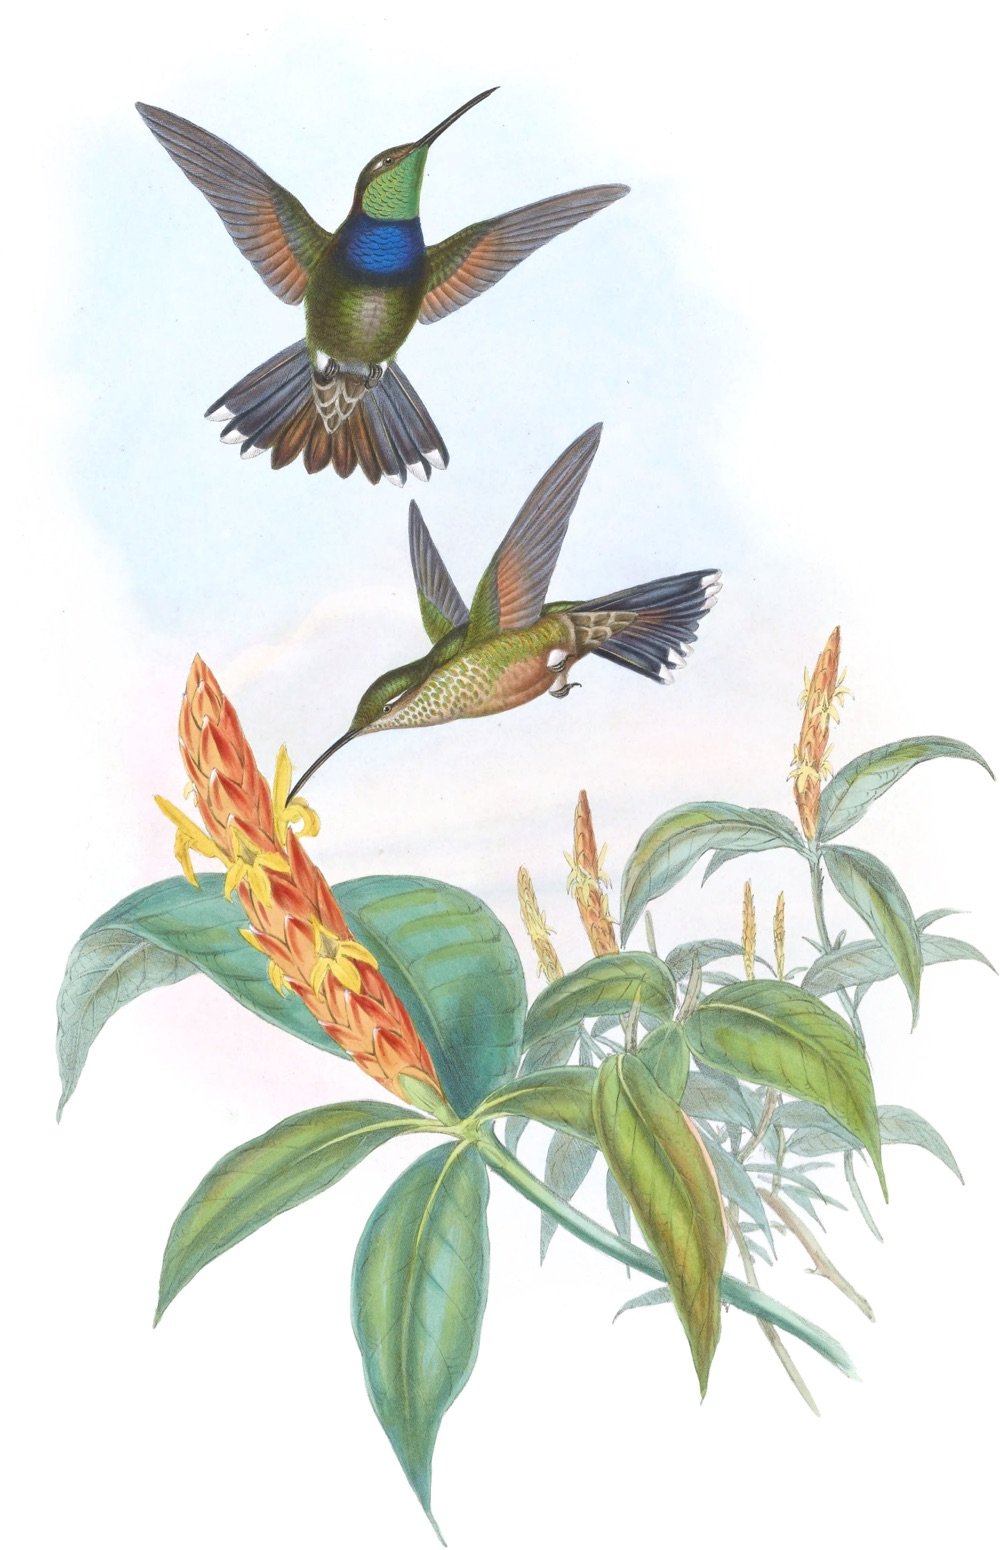 a pair of hummingbirds fly amongst flowers